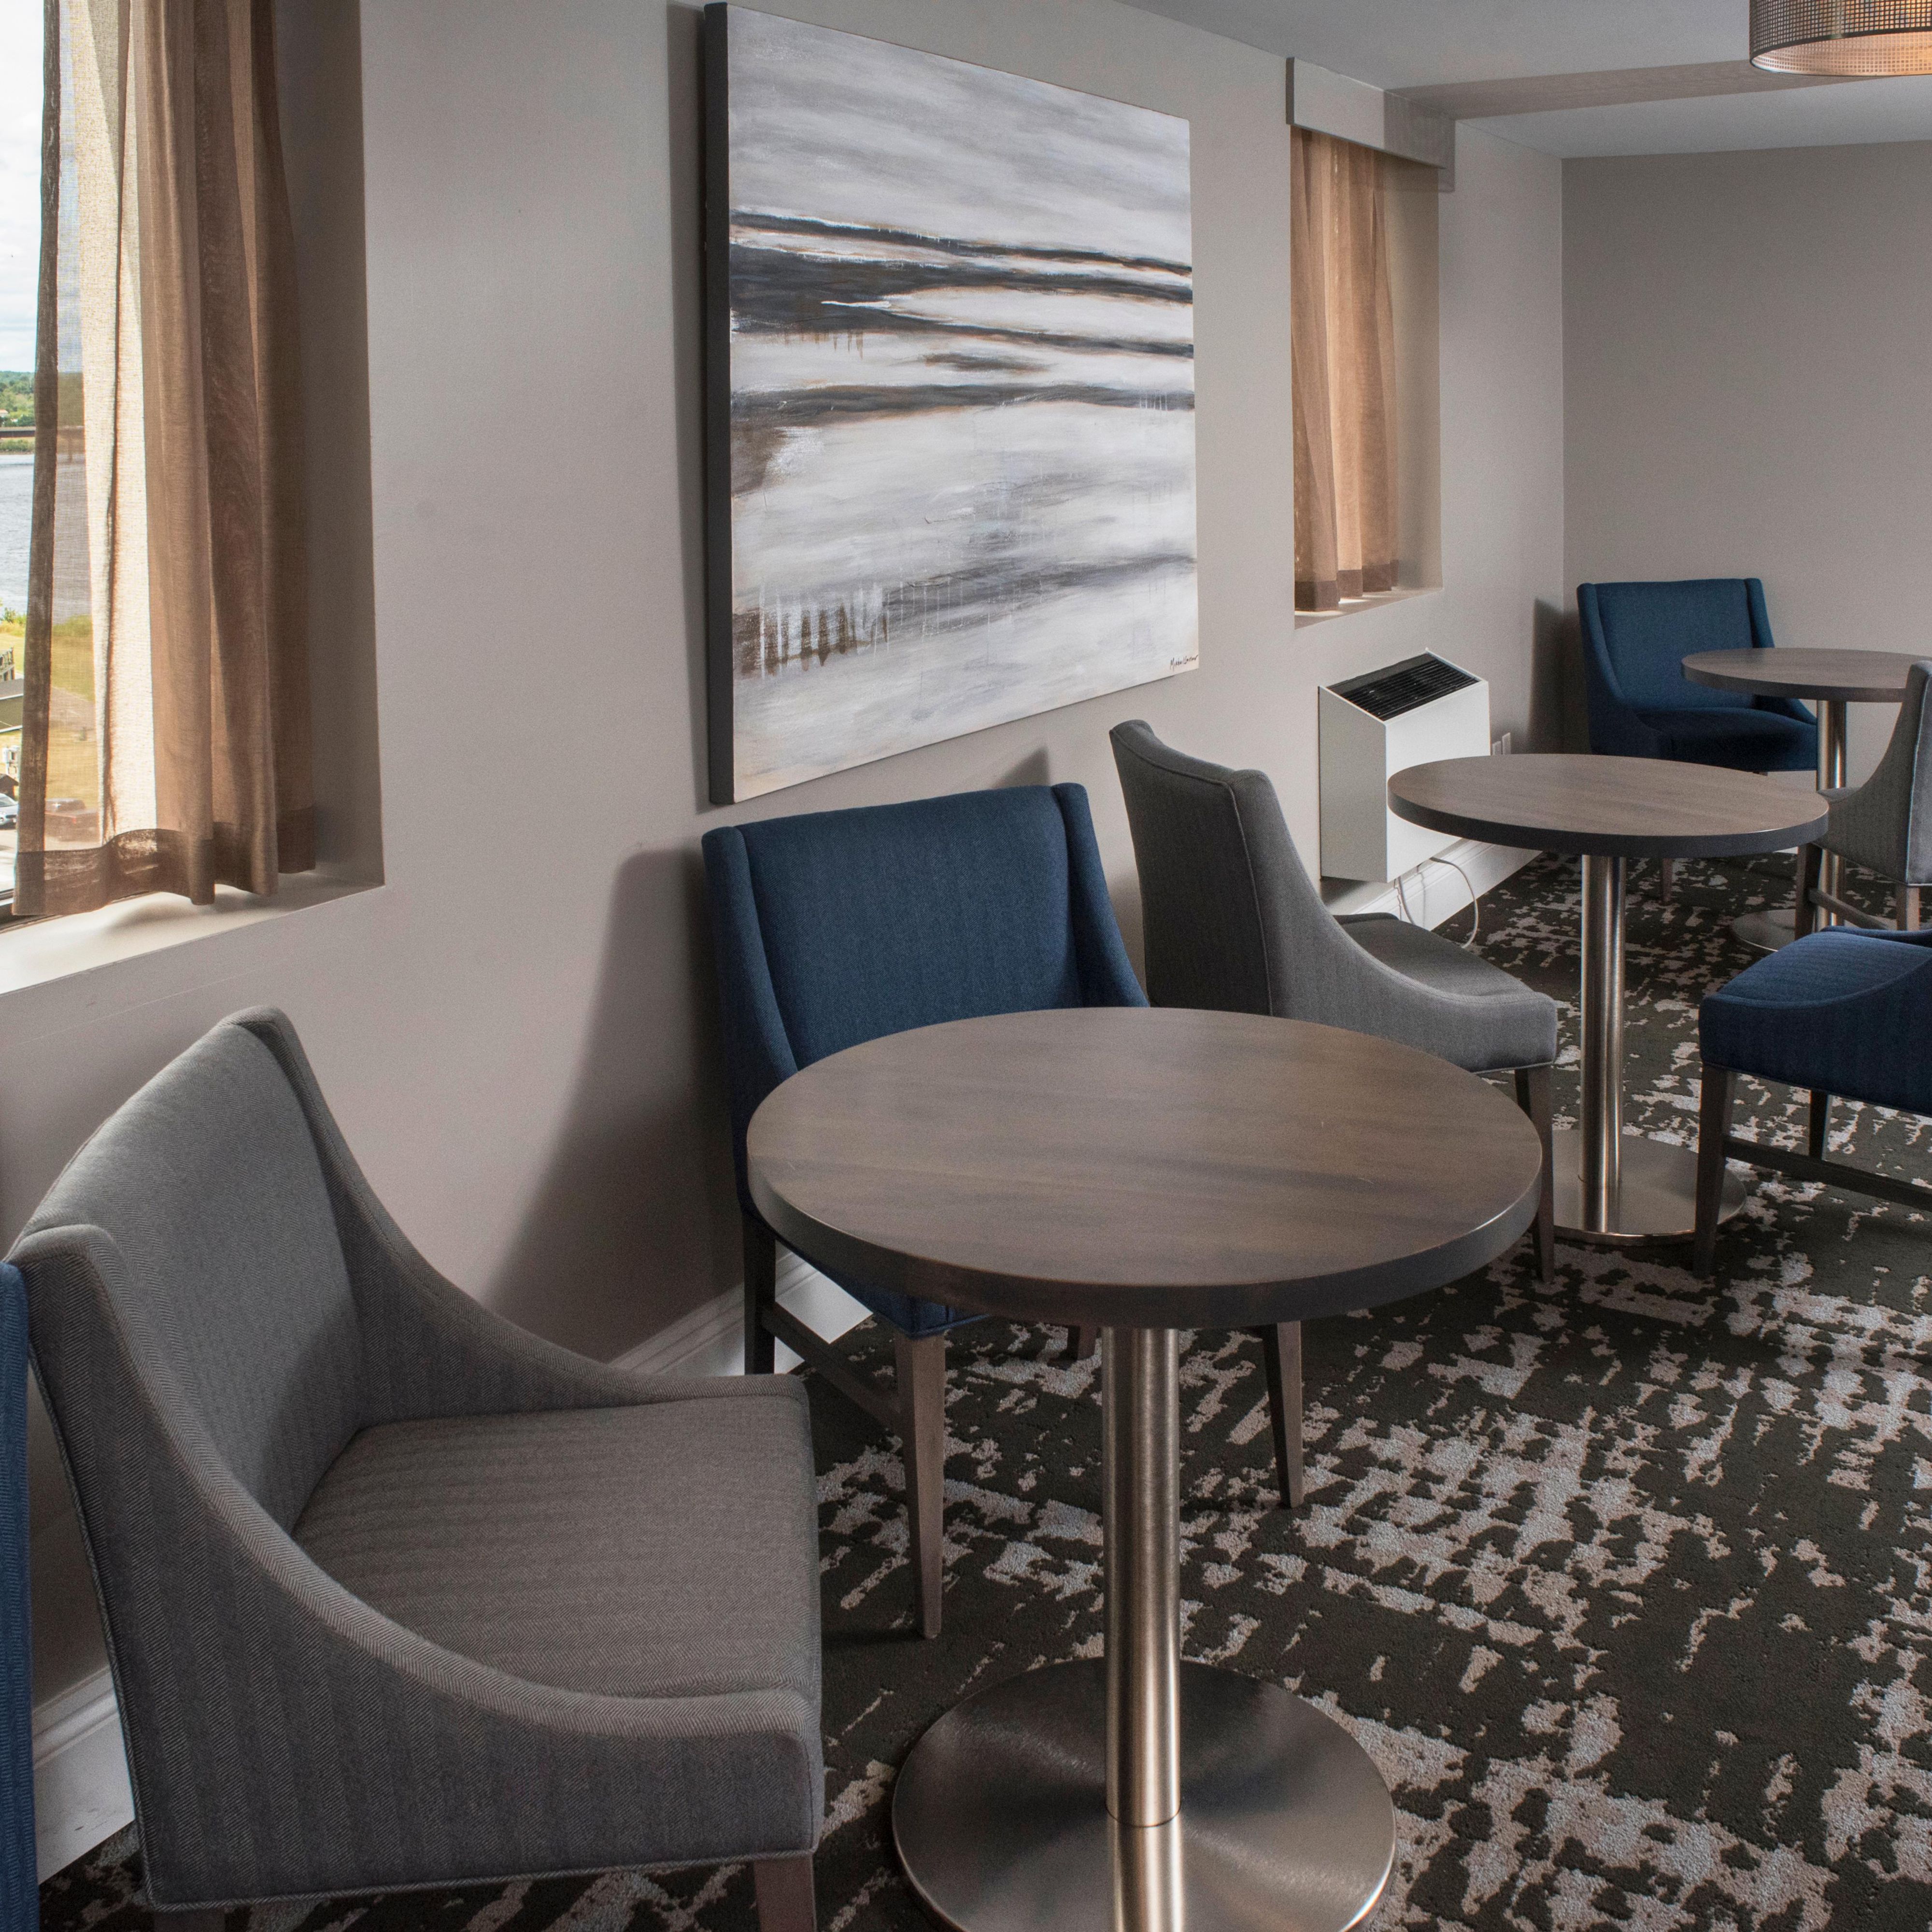 Enjoy the views of St John River at the Club Floor Lounge